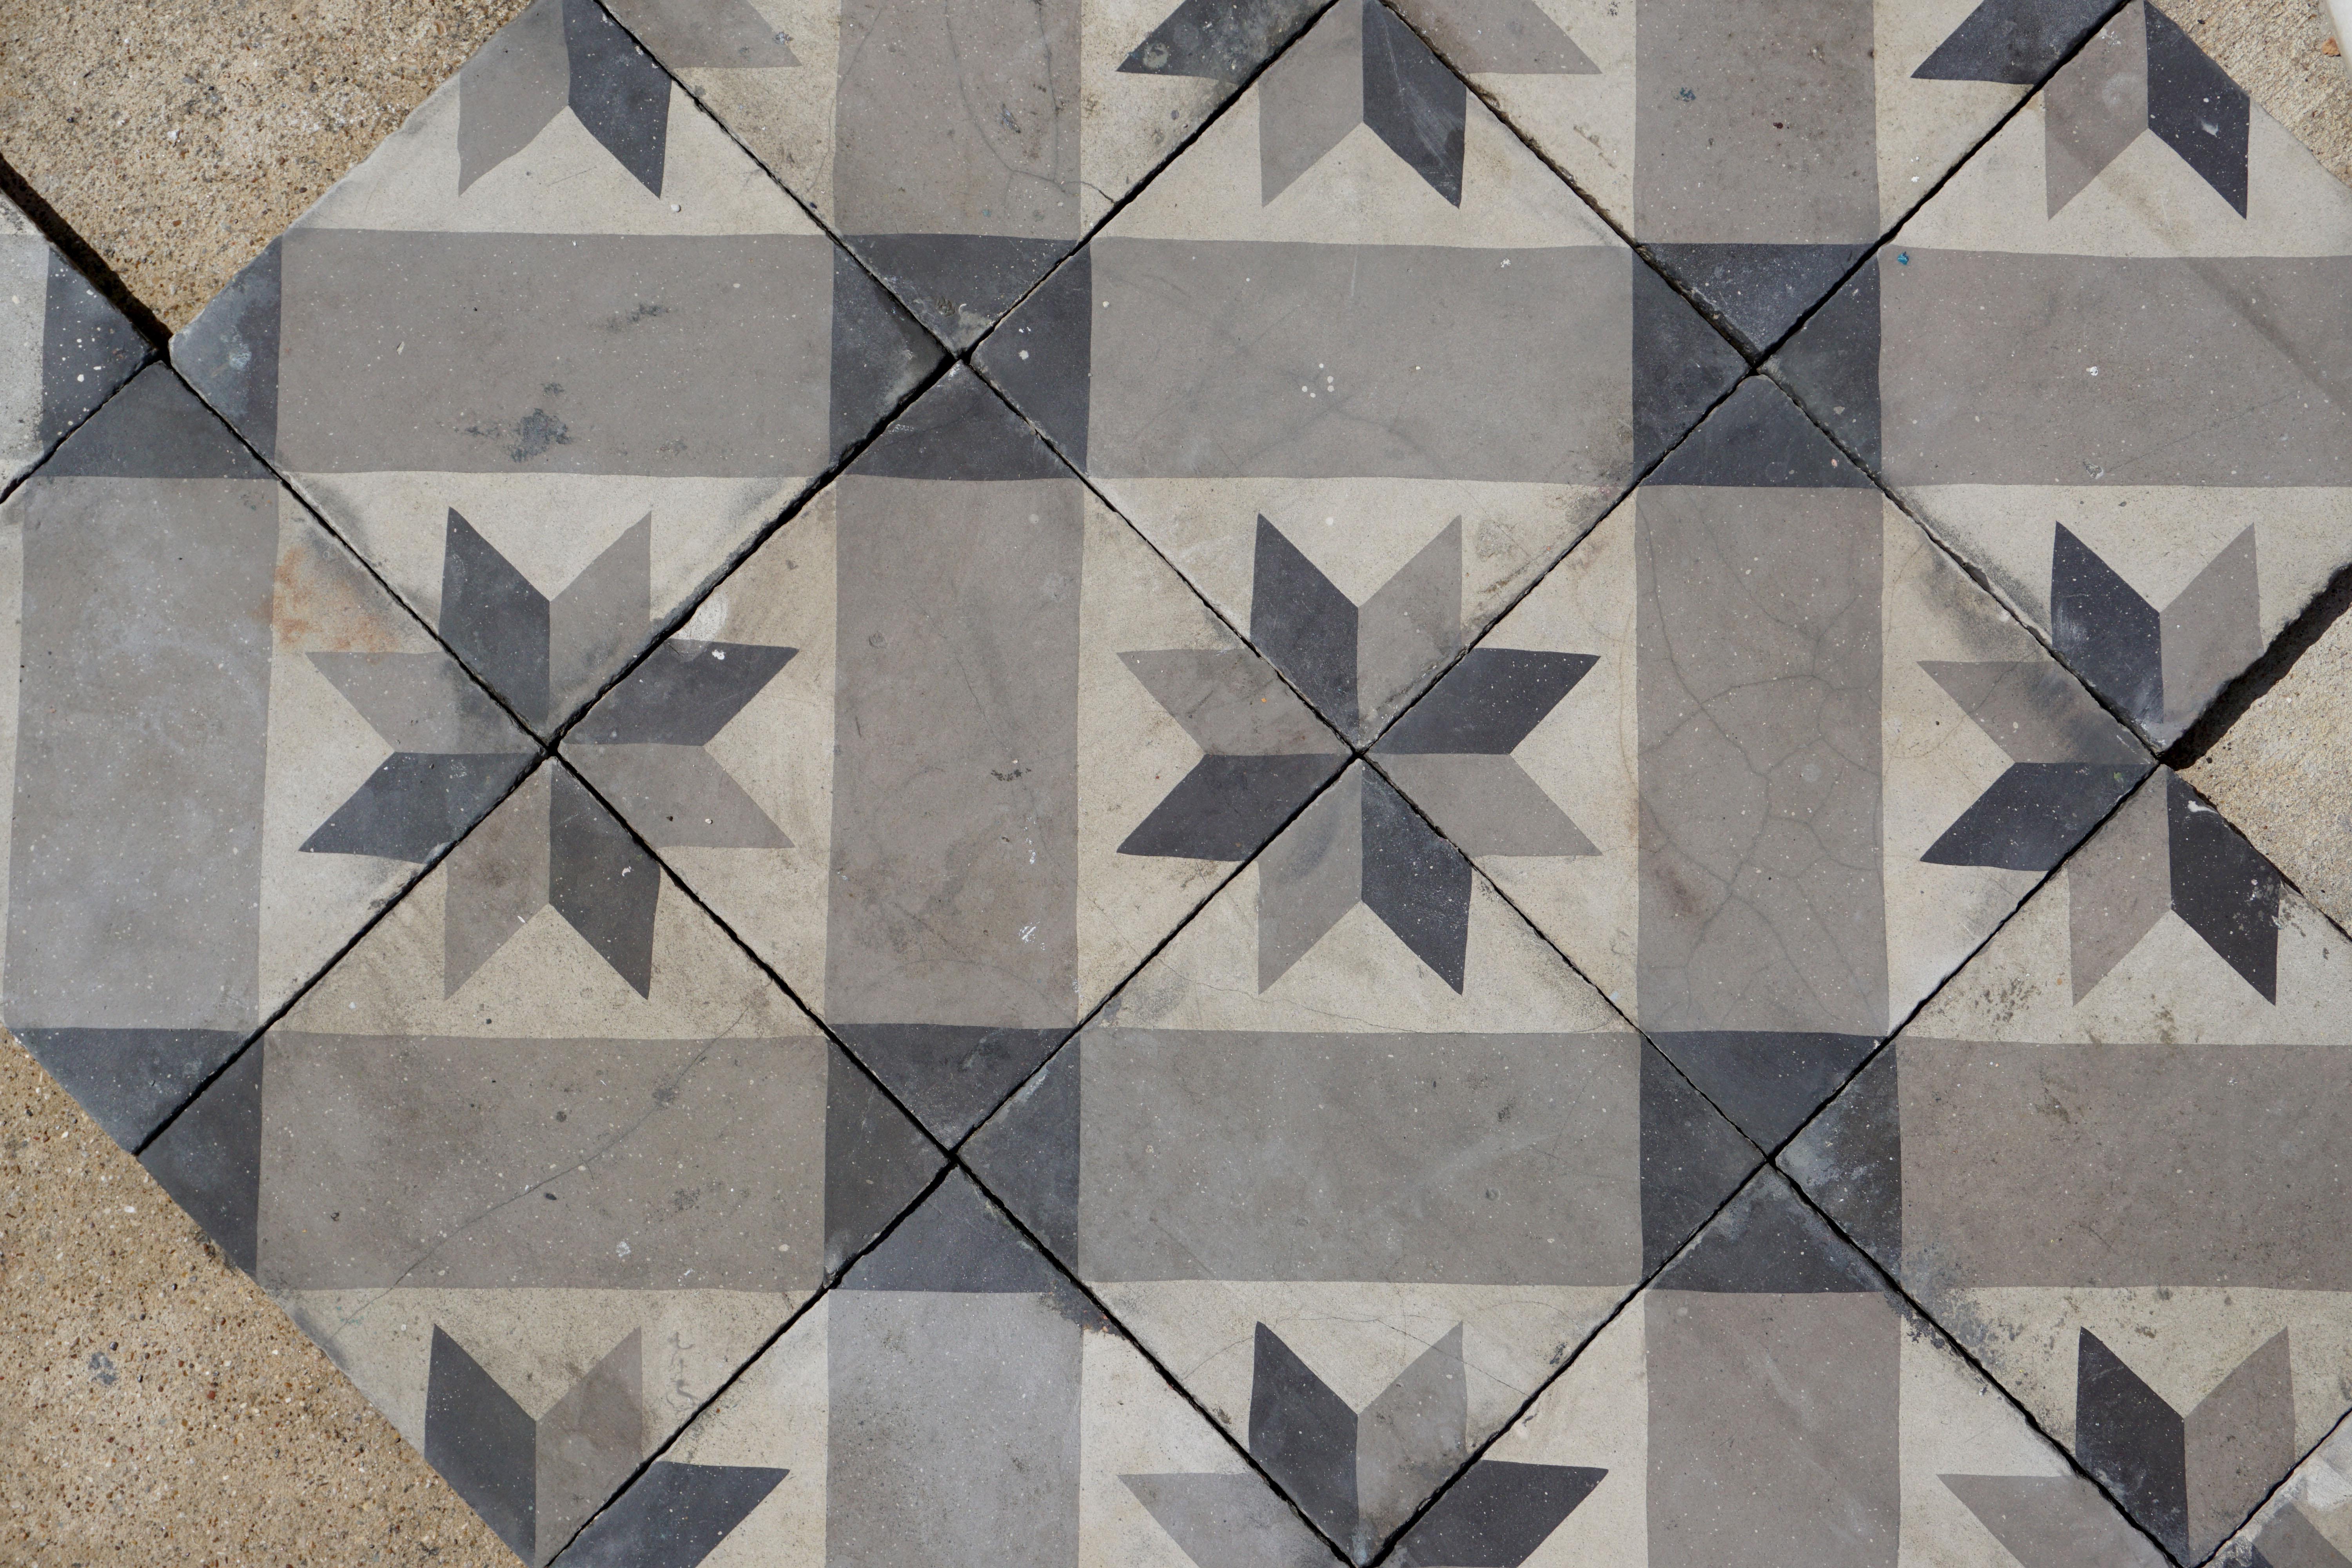 Stone tiles of black, grey, and white hues.

Measures: 296 pieces total, each piece 8'' x 8''. 62 border, 234 field. 

Total lot is 127 square feet. 27 square feet border tile, 100 square feet field.